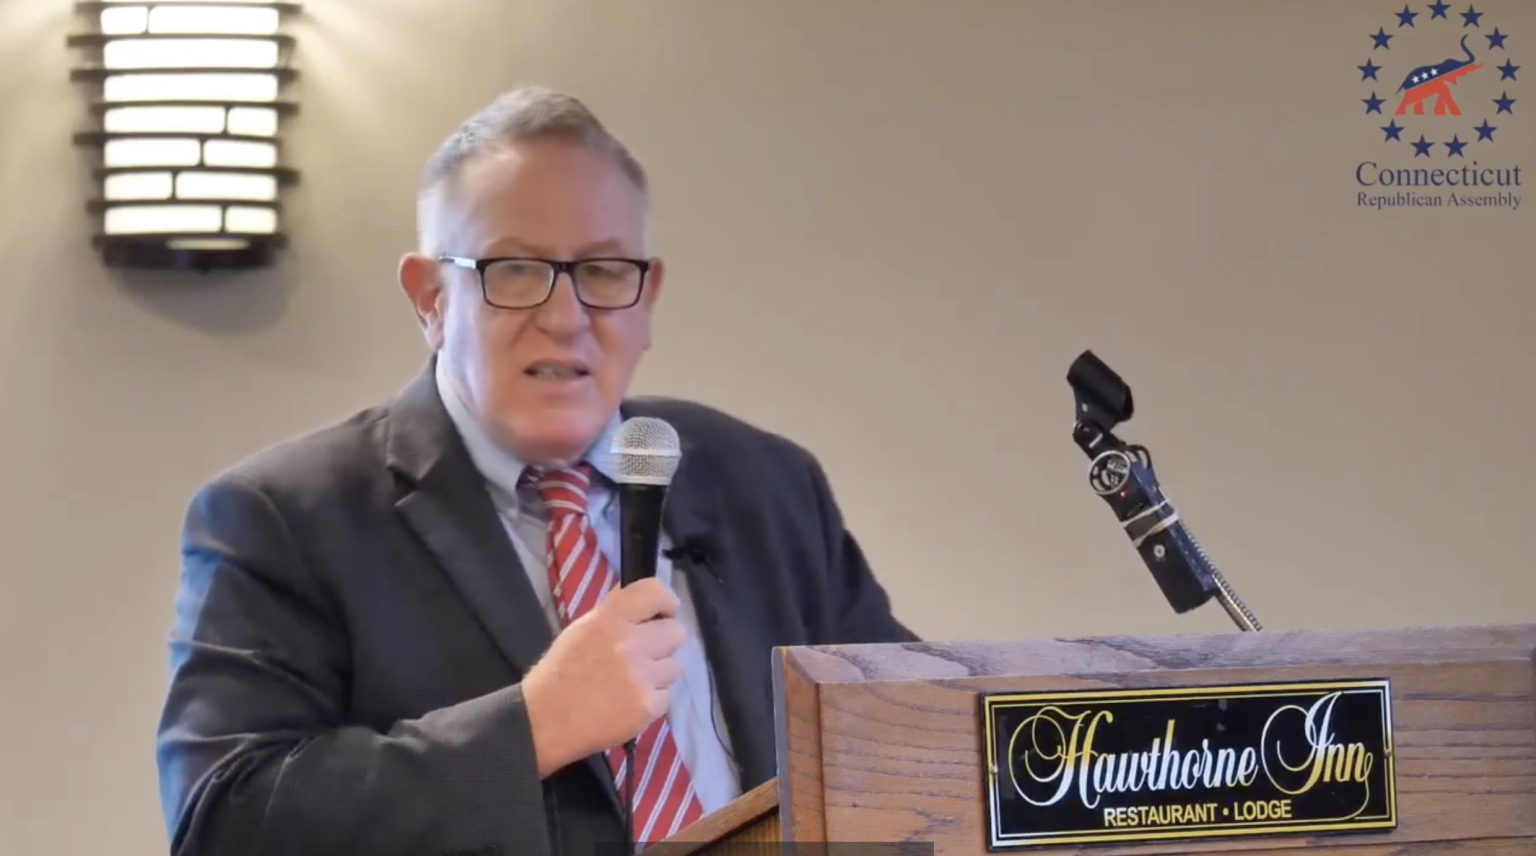 Trevor Loudon Delivered Terrifying Comments About Communist Activity In CT At CTRA Event Last Year